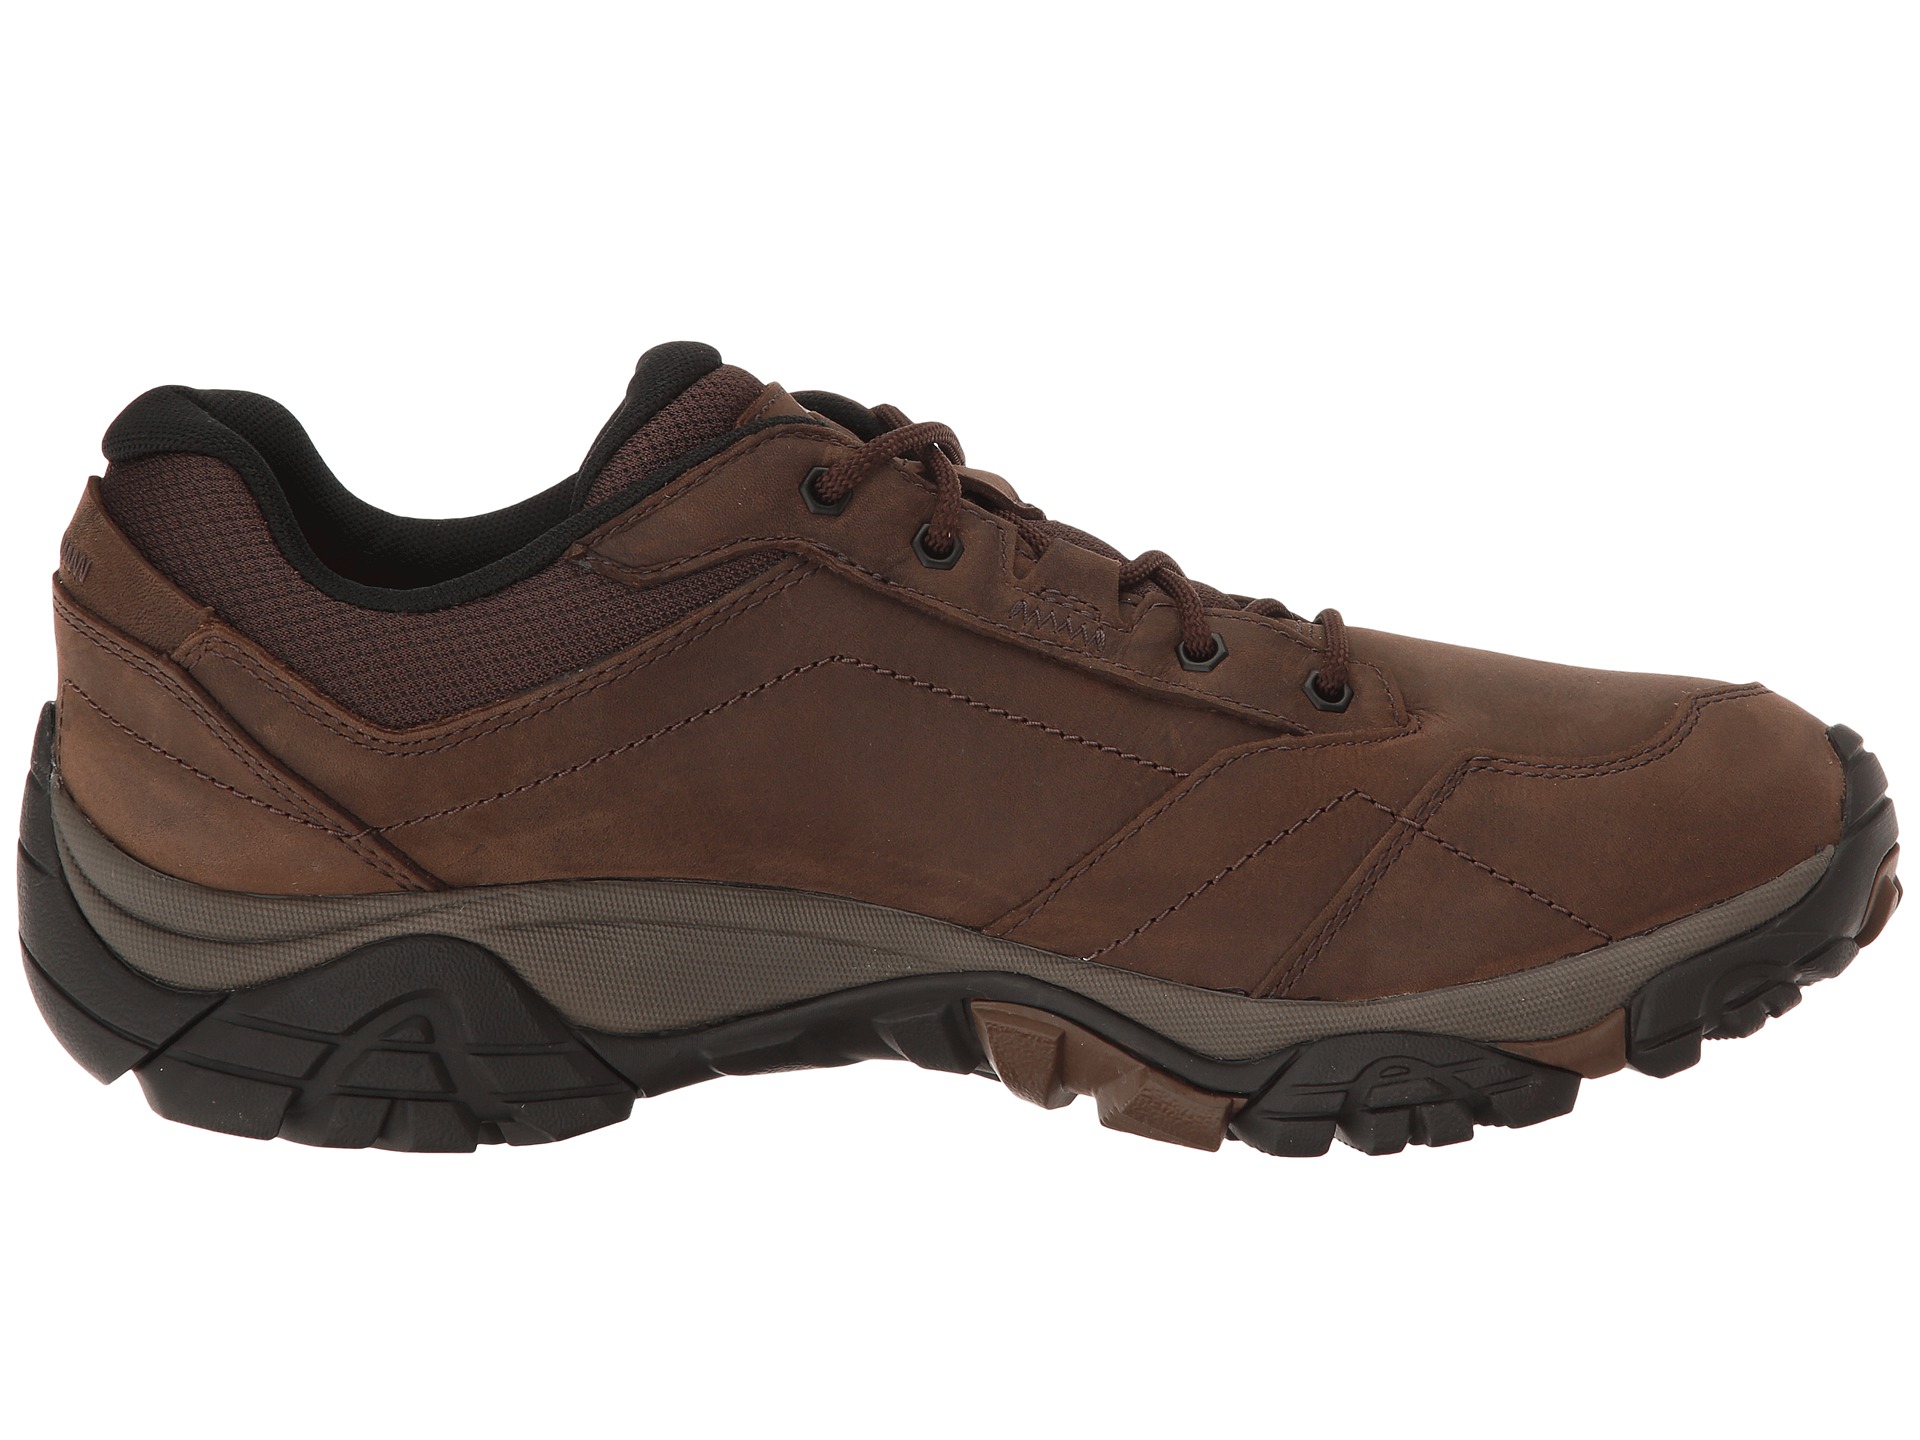 Merrell Moab Adventure Lace at Zappos.com